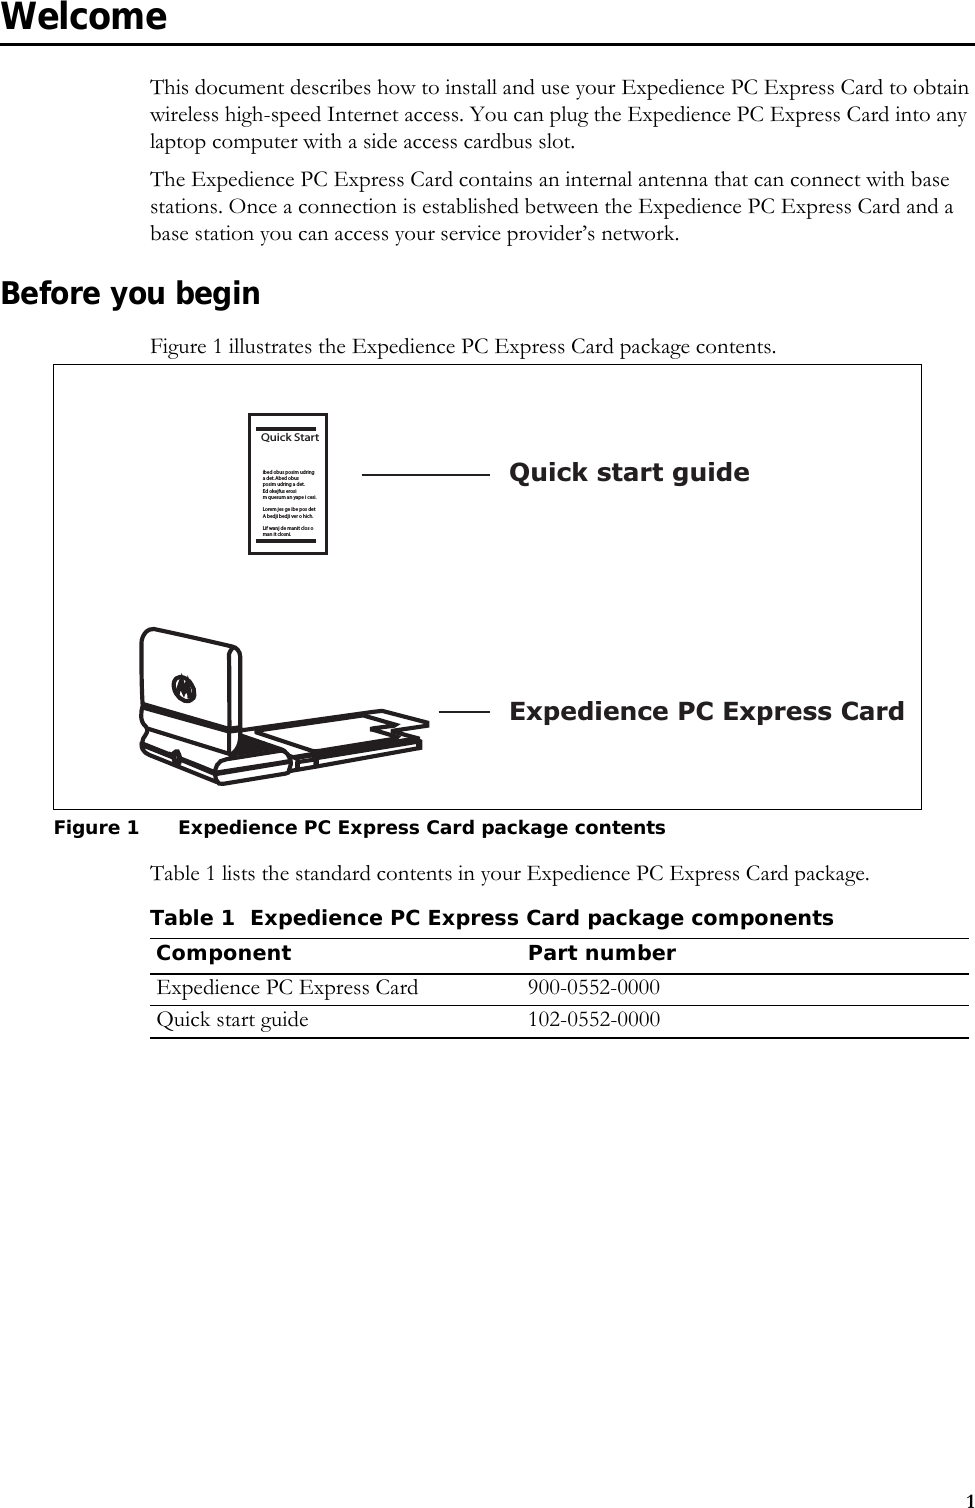 1WelcomeThis document describes how to install and use your Expedience PC Express Card to obtain wireless high-speed Internet access. You can plug the Expedience PC Express Card into any laptop computer with a side access cardbus slot.The Expedience PC Express Card contains an internal antenna that can connect with base stations. Once a connection is established between the Expedience PC Express Card and a base station you can access your service provider’s network. Before you beginFigure 1 illustrates the Expedience PC Express Card package contents.Table 1 lists the standard contents in your Expedience PC Express Card package.Figure 1 Expedience PC Express Card package contentsQuick Startibed obus posim udringa det. Abed obus posim udring a det. Ed okejfus erosim quesum an yape i cesi.Lorem jes ge ibe pos detA bedji bedji ver o hich.Lif wanj de manit clos oman it closni.Expedience PC Express CardQuick start guideTable 1 Expedience PC Express Card package componentsComponent Part numberExpedience PC Express Card 900-0552-0000Quick start guide 102-0552-0000